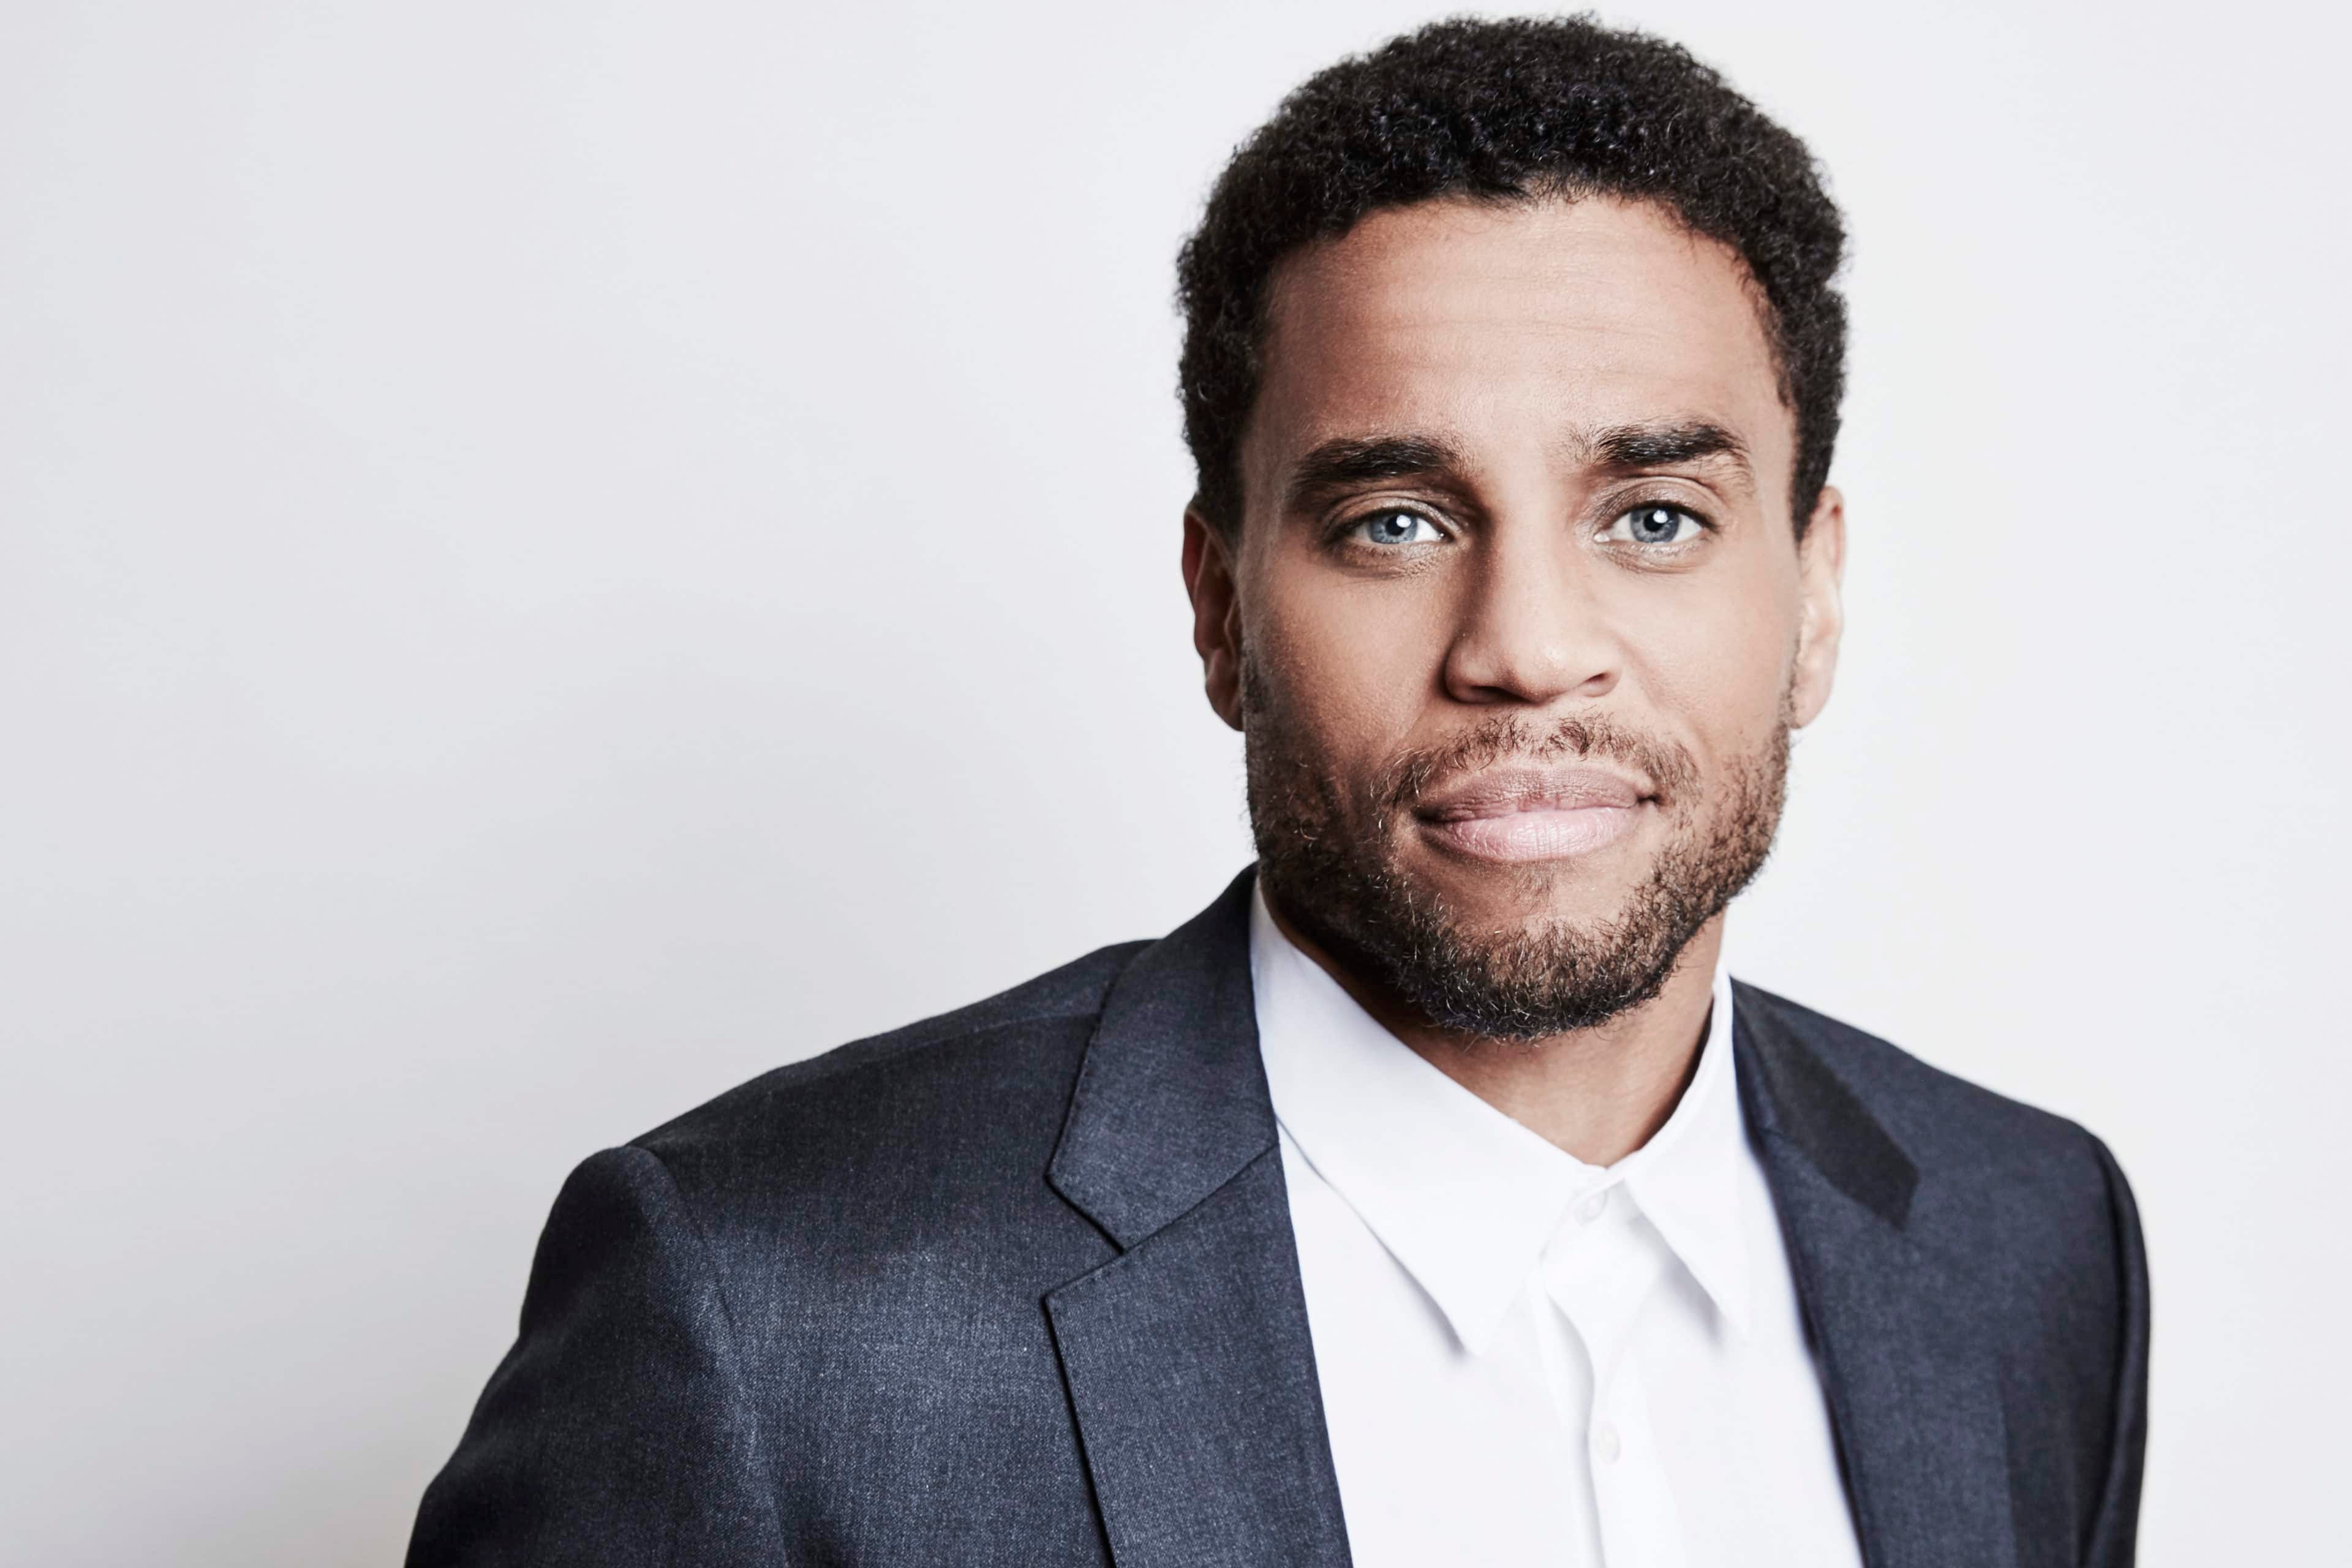 'The Intruder' Star Michael Ealy Says 'Guns In The House' Equal 'Disaster'